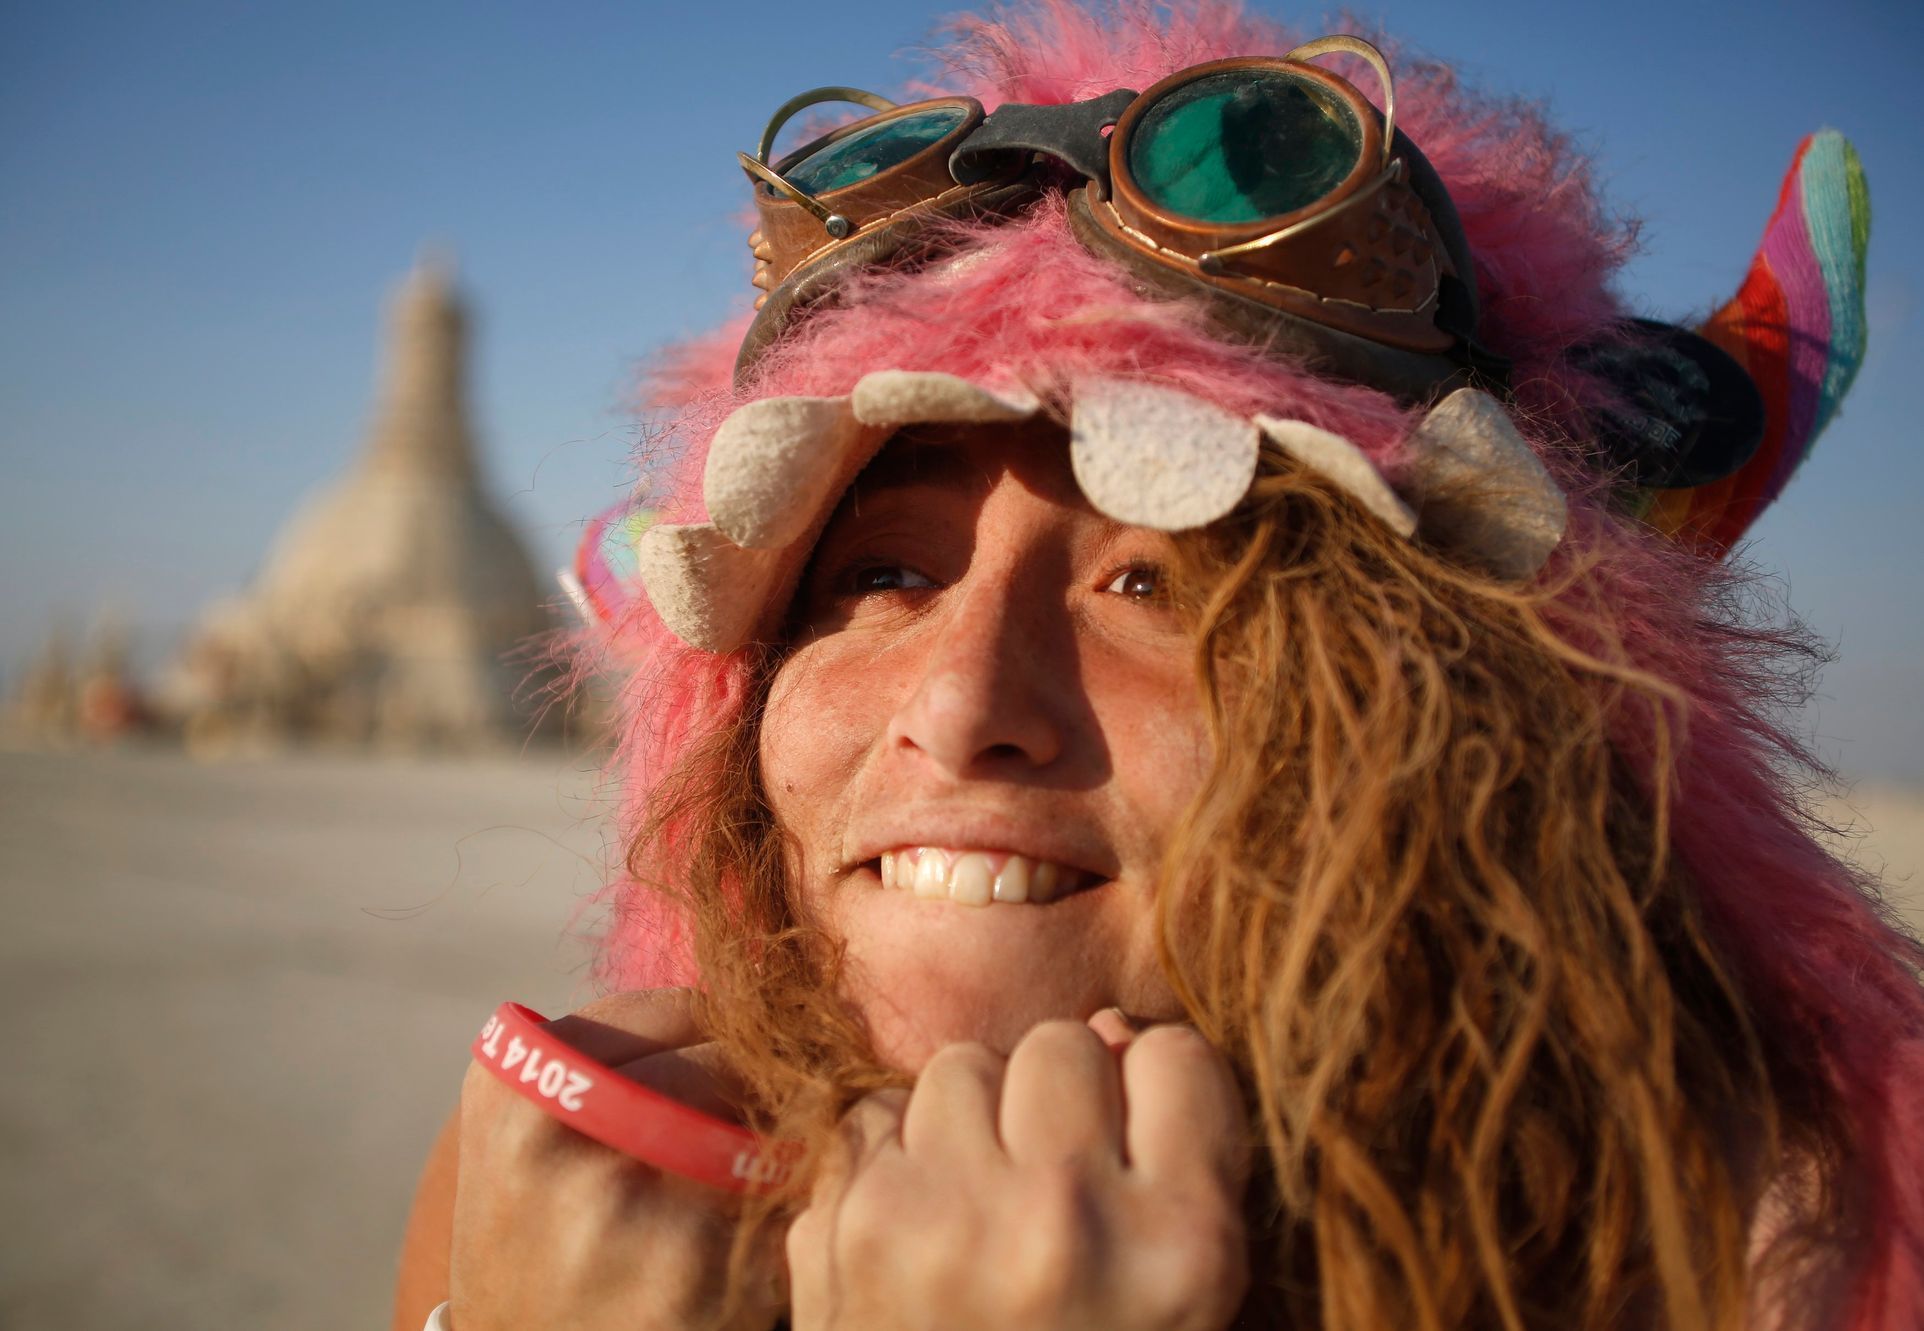 Participant Sandy Candy before the Temple of Grace burns on the last day of the Burning Man 2014 &quot;Caravansary&quot; arts and music festival in the Black Rock Desert of Nevada